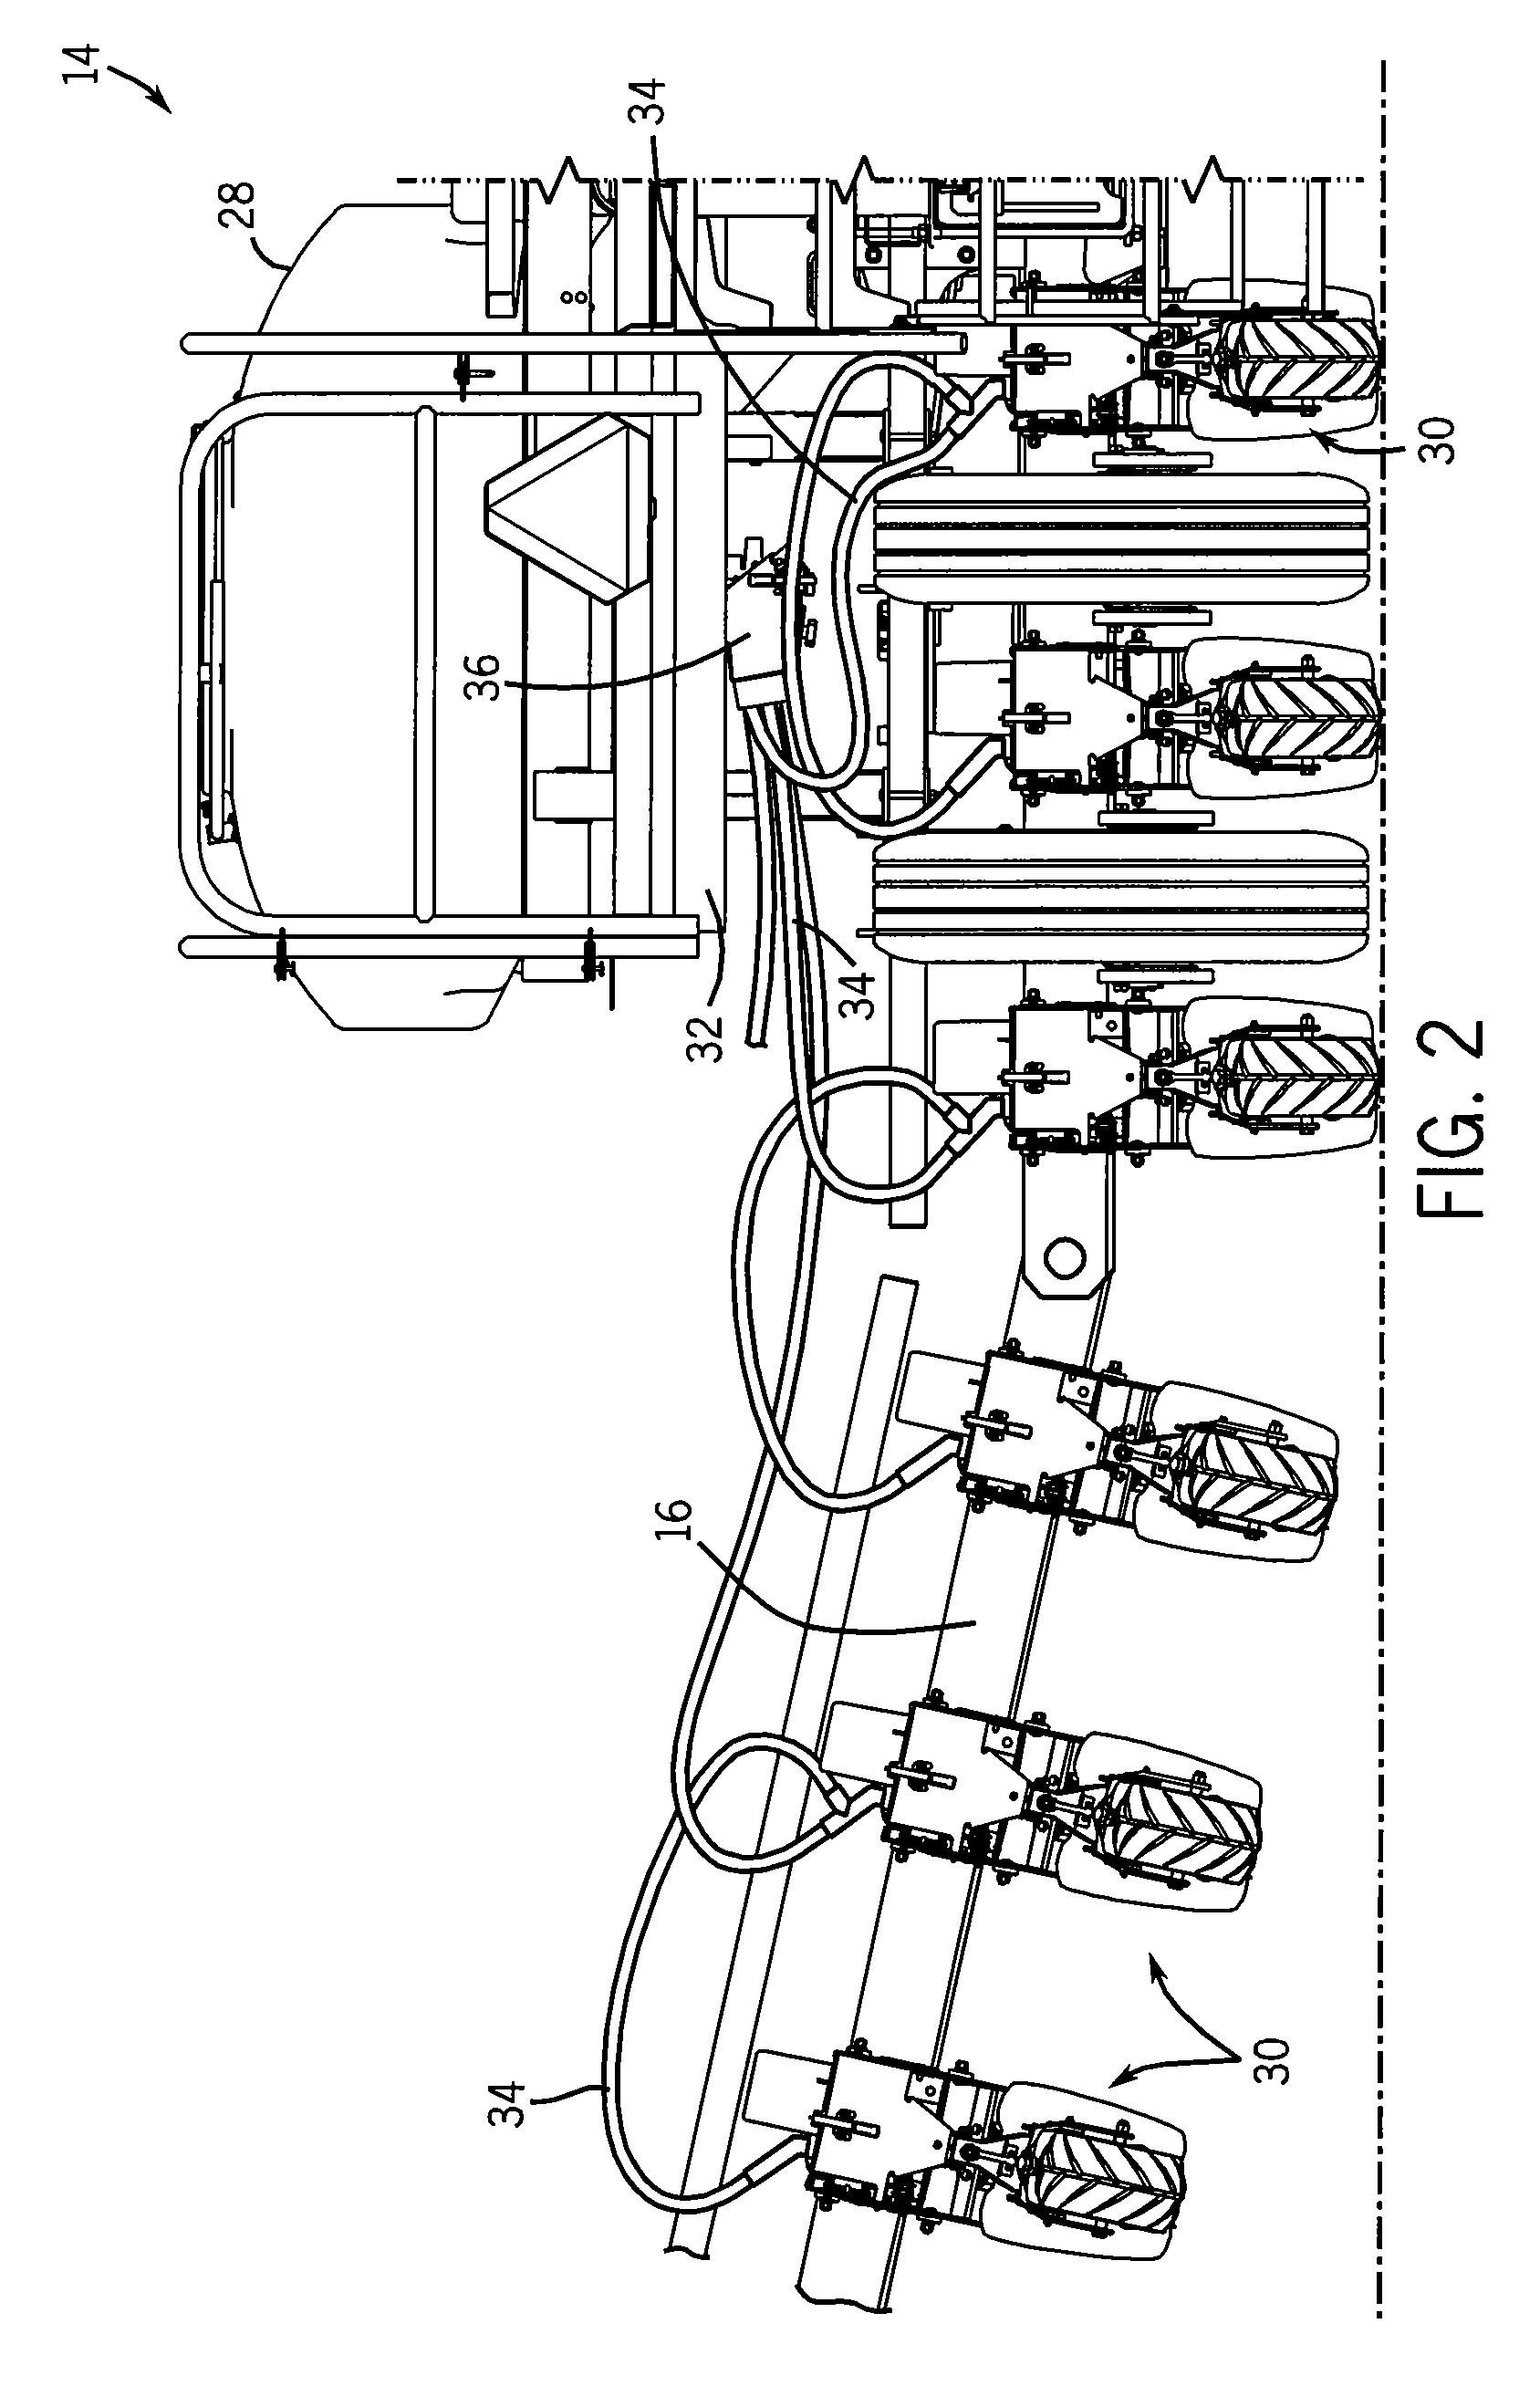 Method And Apparatus For Regulating Air Flow Through Supply Conduits Through Which Product Entrained In An Air Flow Is Provided To Multiple On-Row Product Containers Of An Agricultural Implement